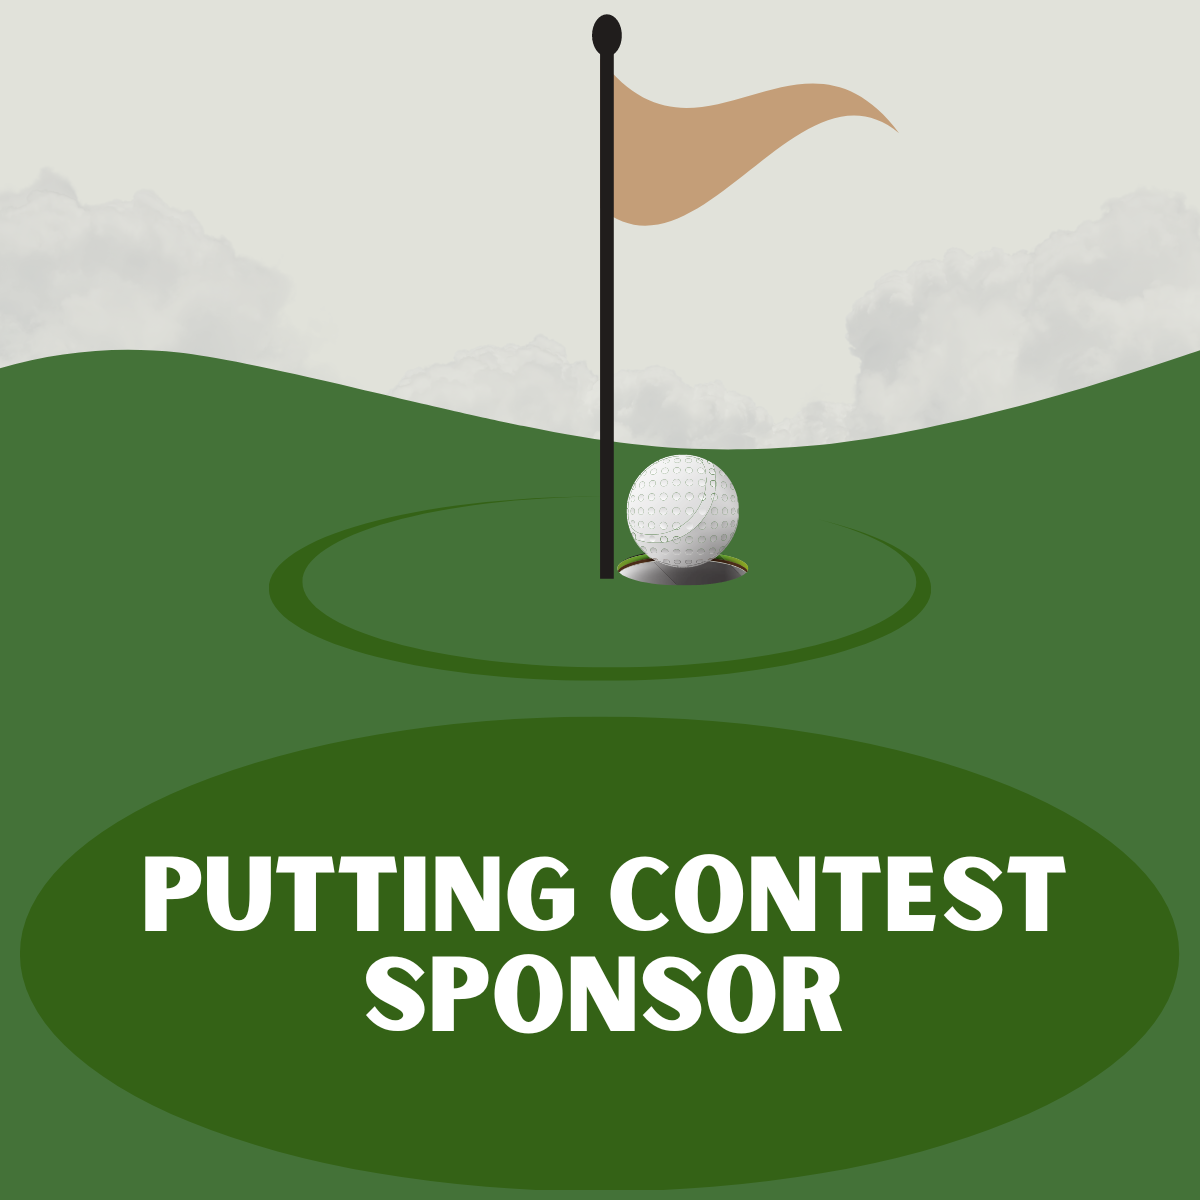 Putting Contest Sponsor - New Mexico Open